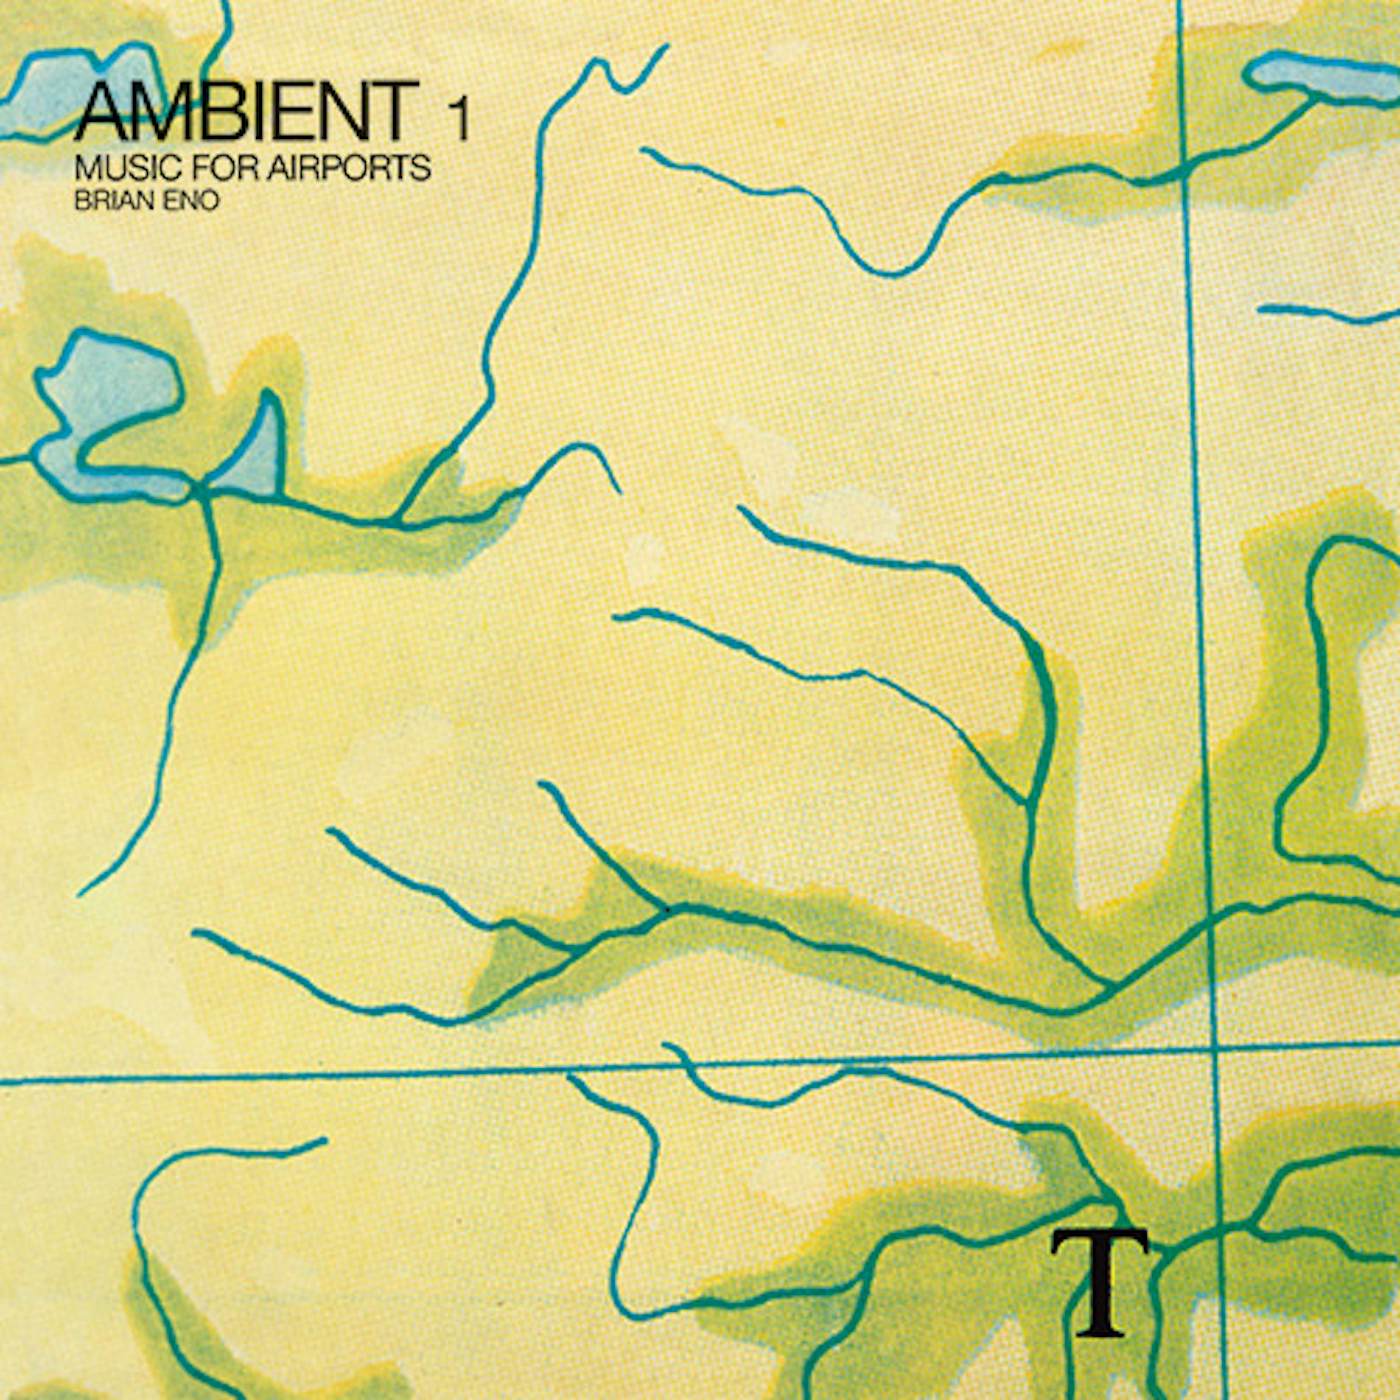 Brian Eno AMBIENT 1: MUSIC FOR AIRPORTS Vinyl Record